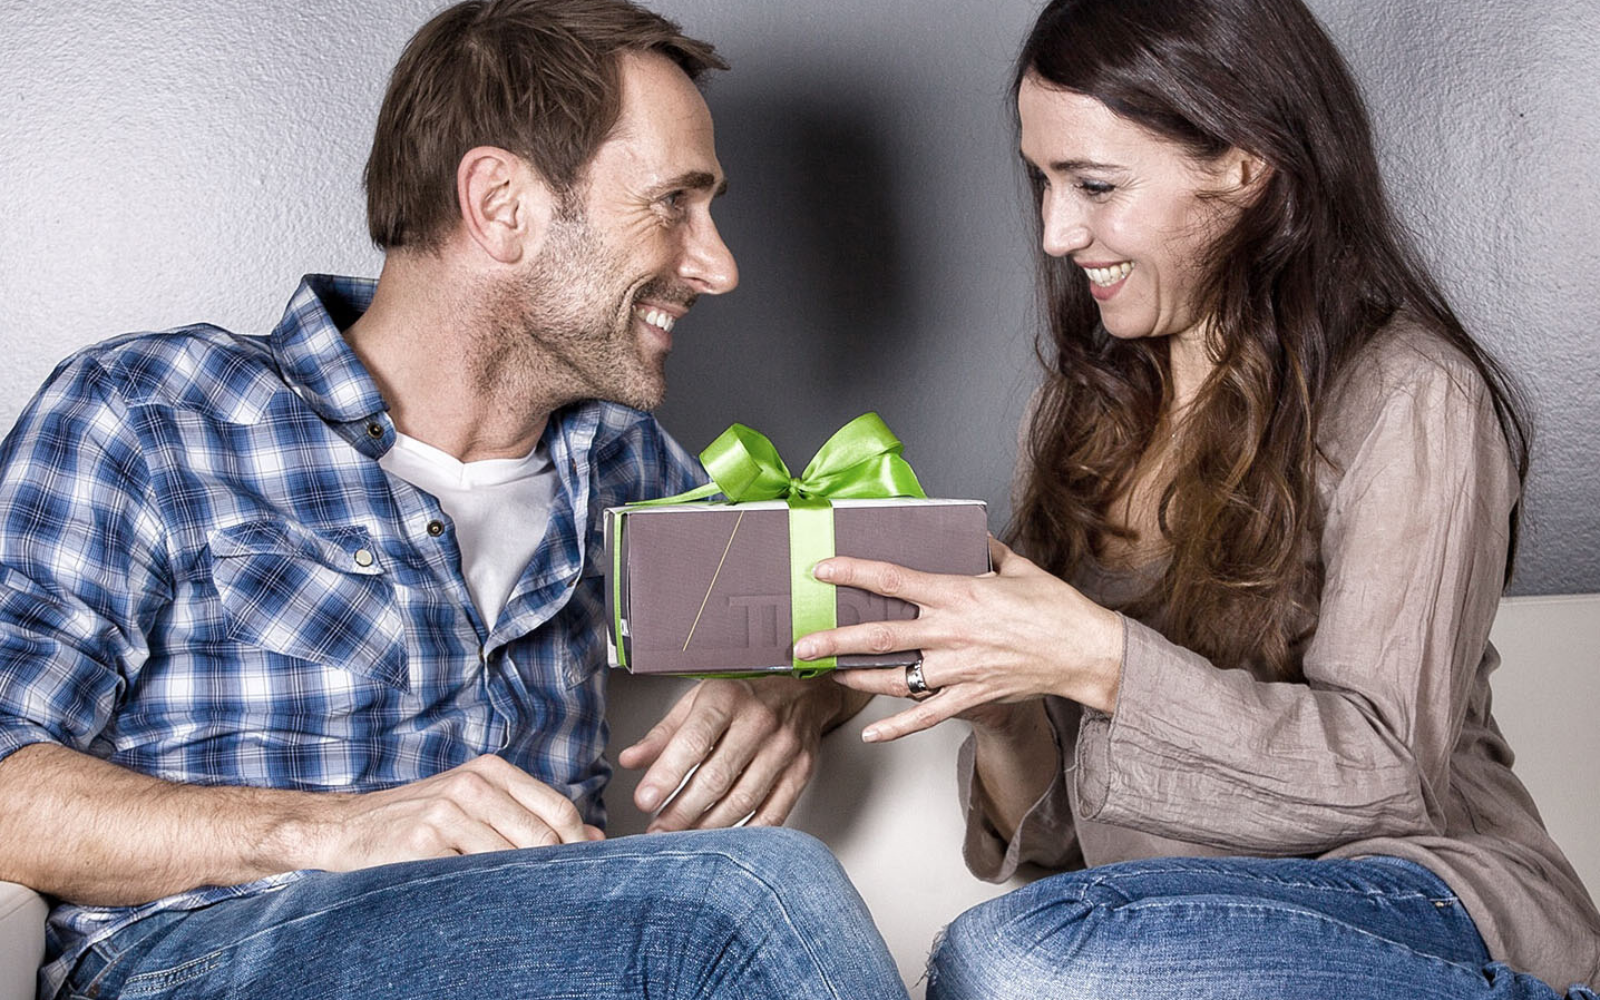 How to find the perfect gift